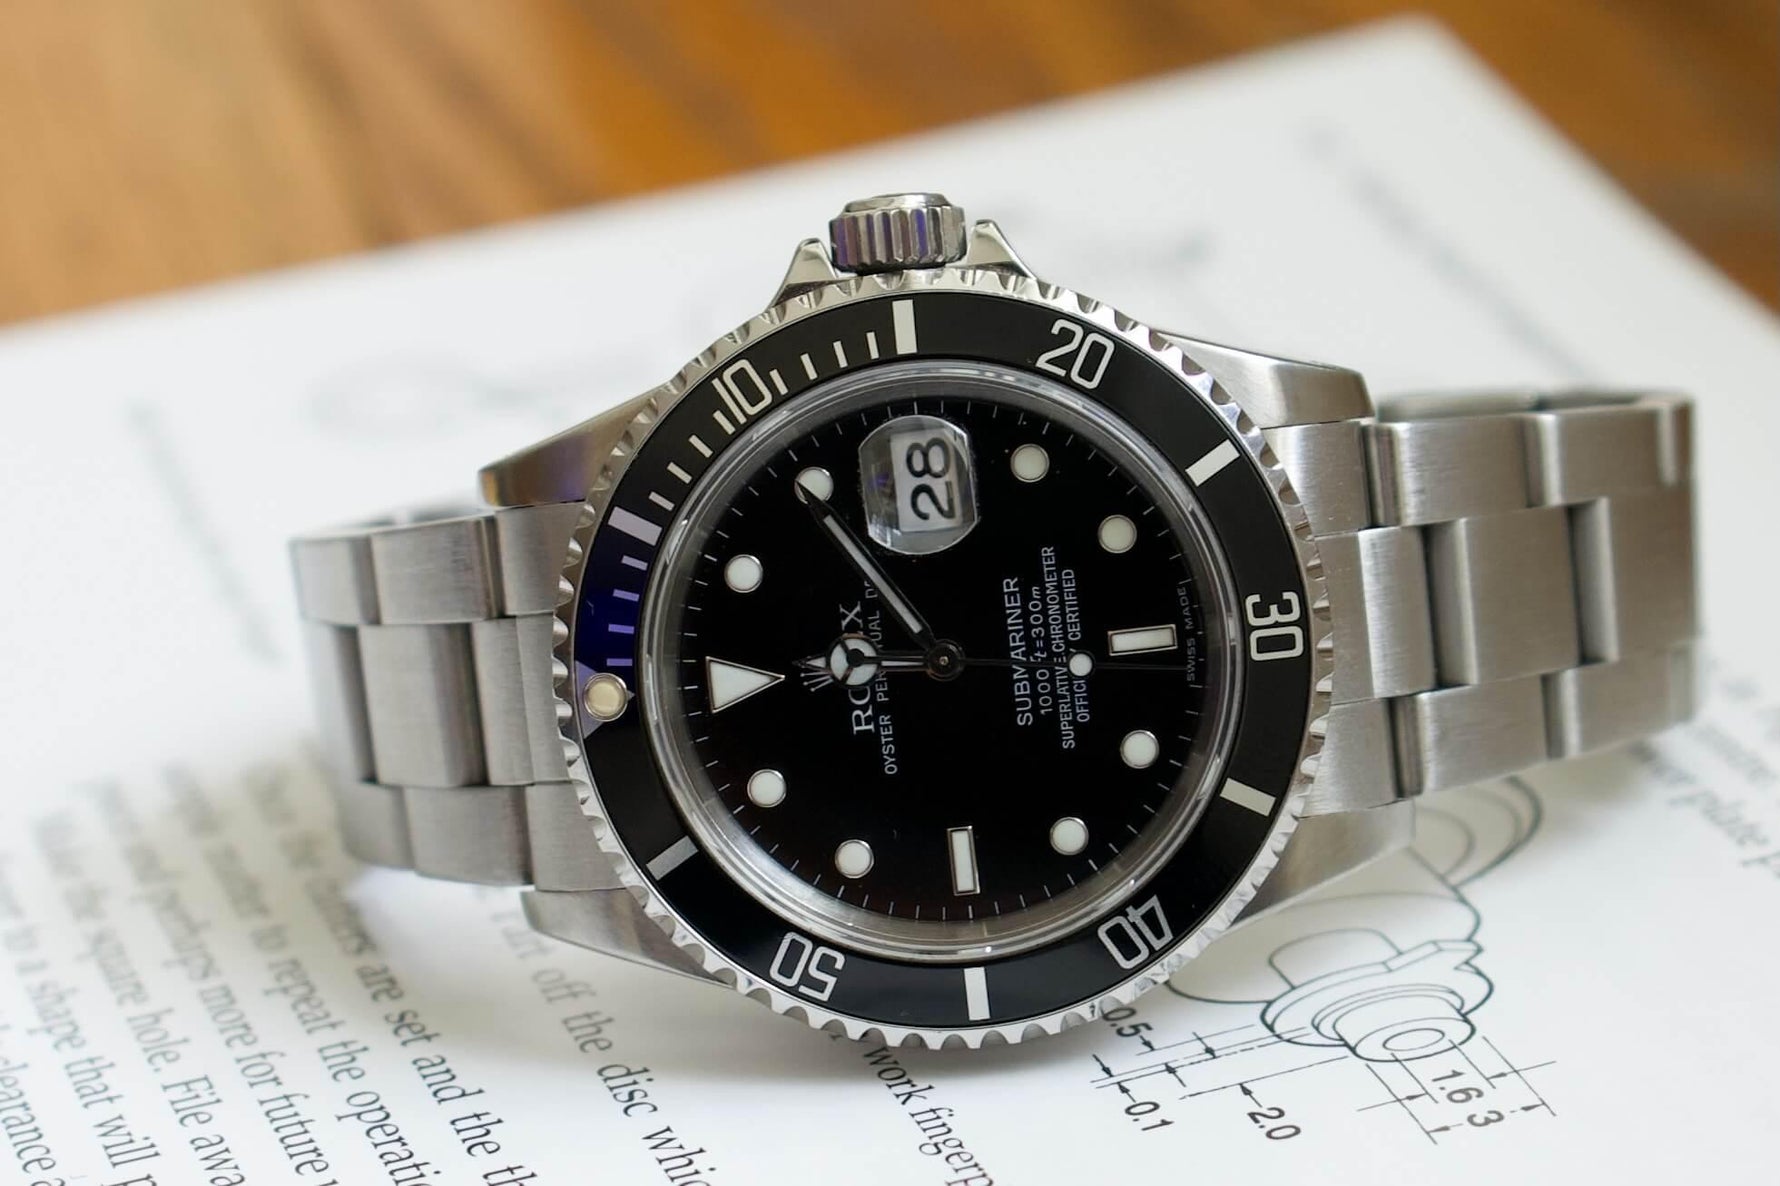 SOLDOUT: Rolex Submariner Date 16610 Mens Black Dial - WearingTime Luxury Watches